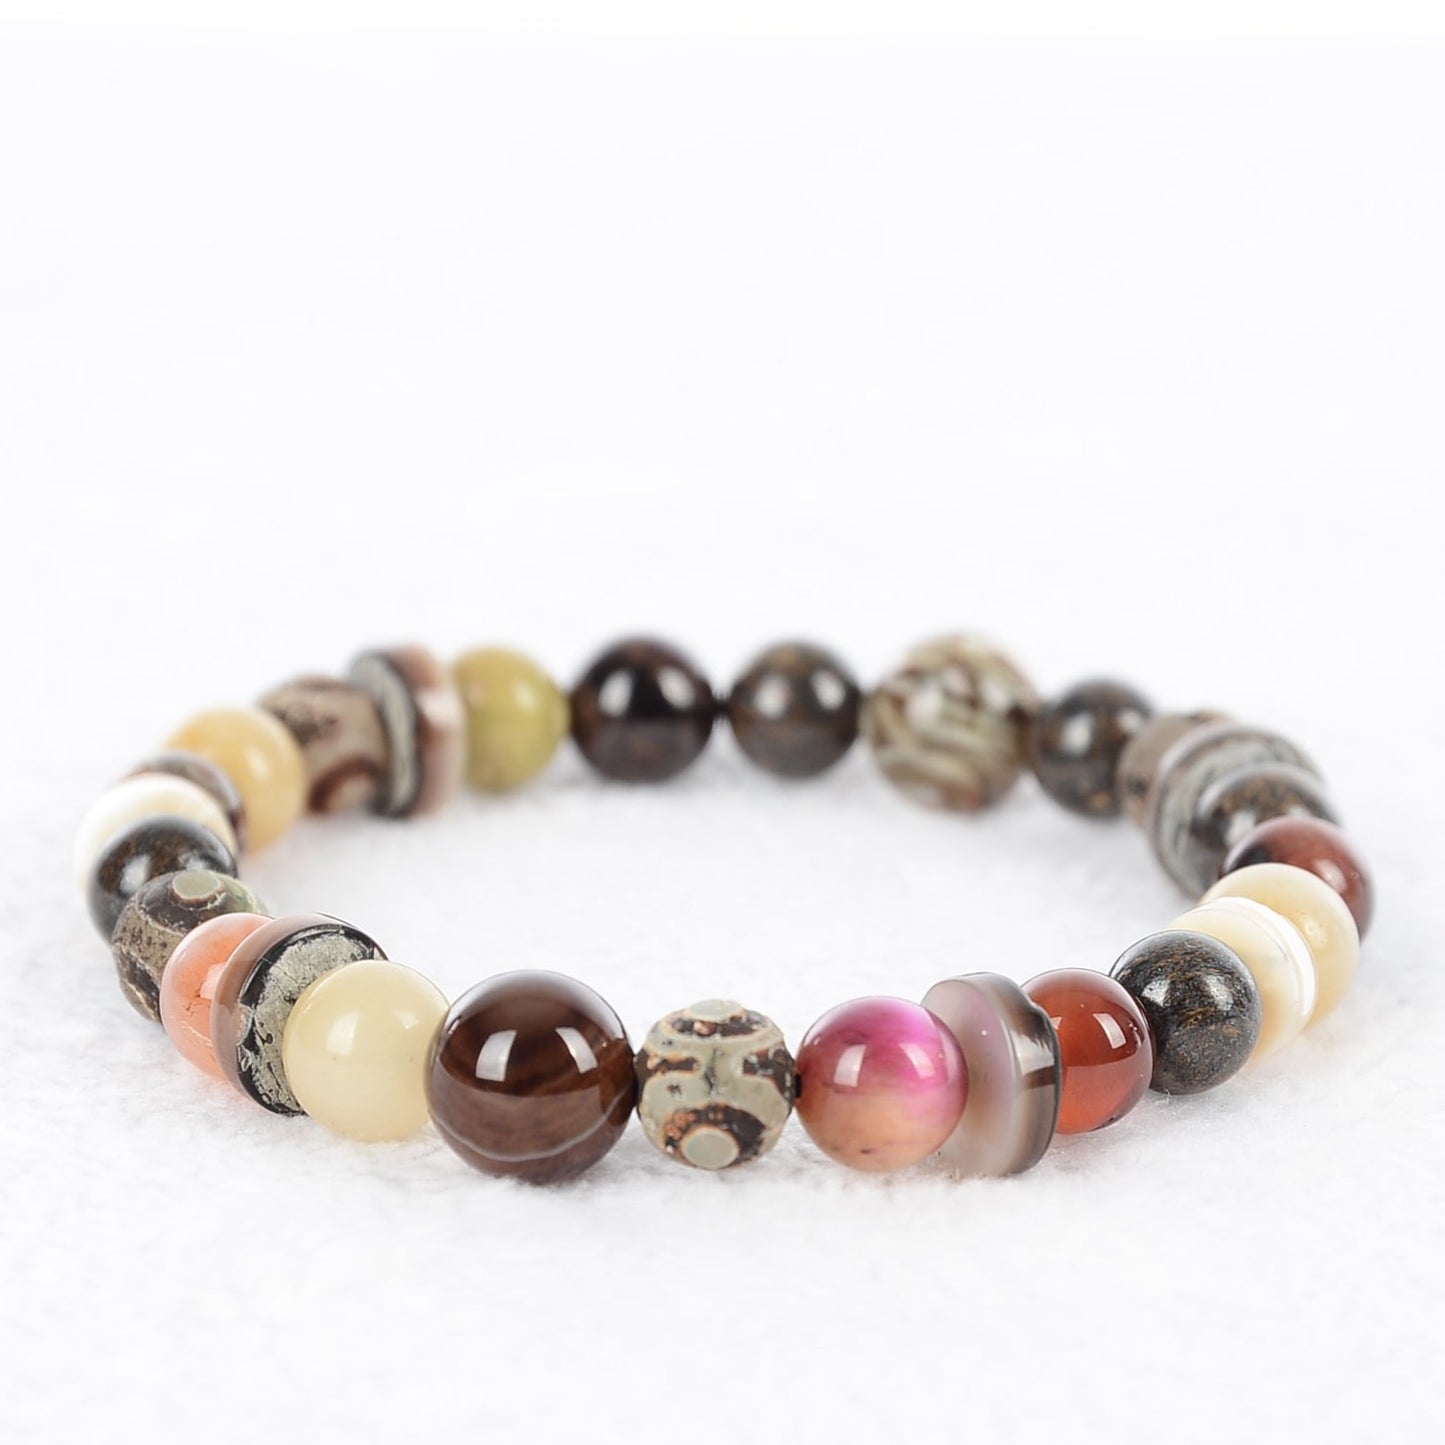 About Last Night bead bracelet is made of earth tones colors with hints of pink  and yellow. Made in a size 7 inch but can be custom made to your size. 